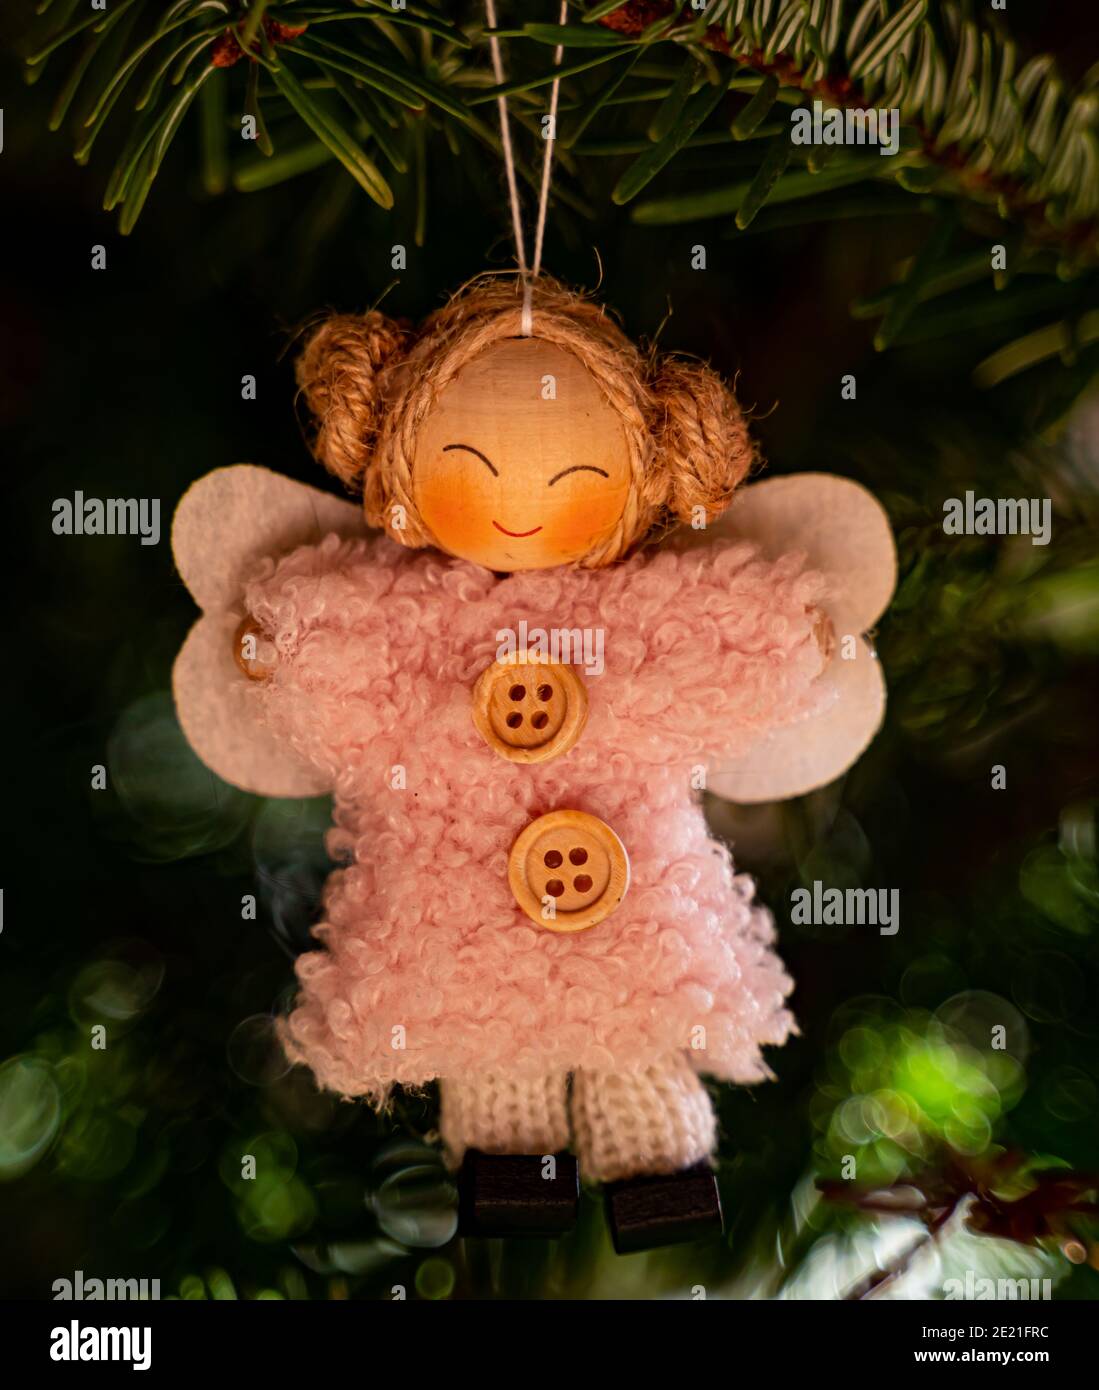 Cute angel decoration on a Christmas tree, close up. Stock Photo